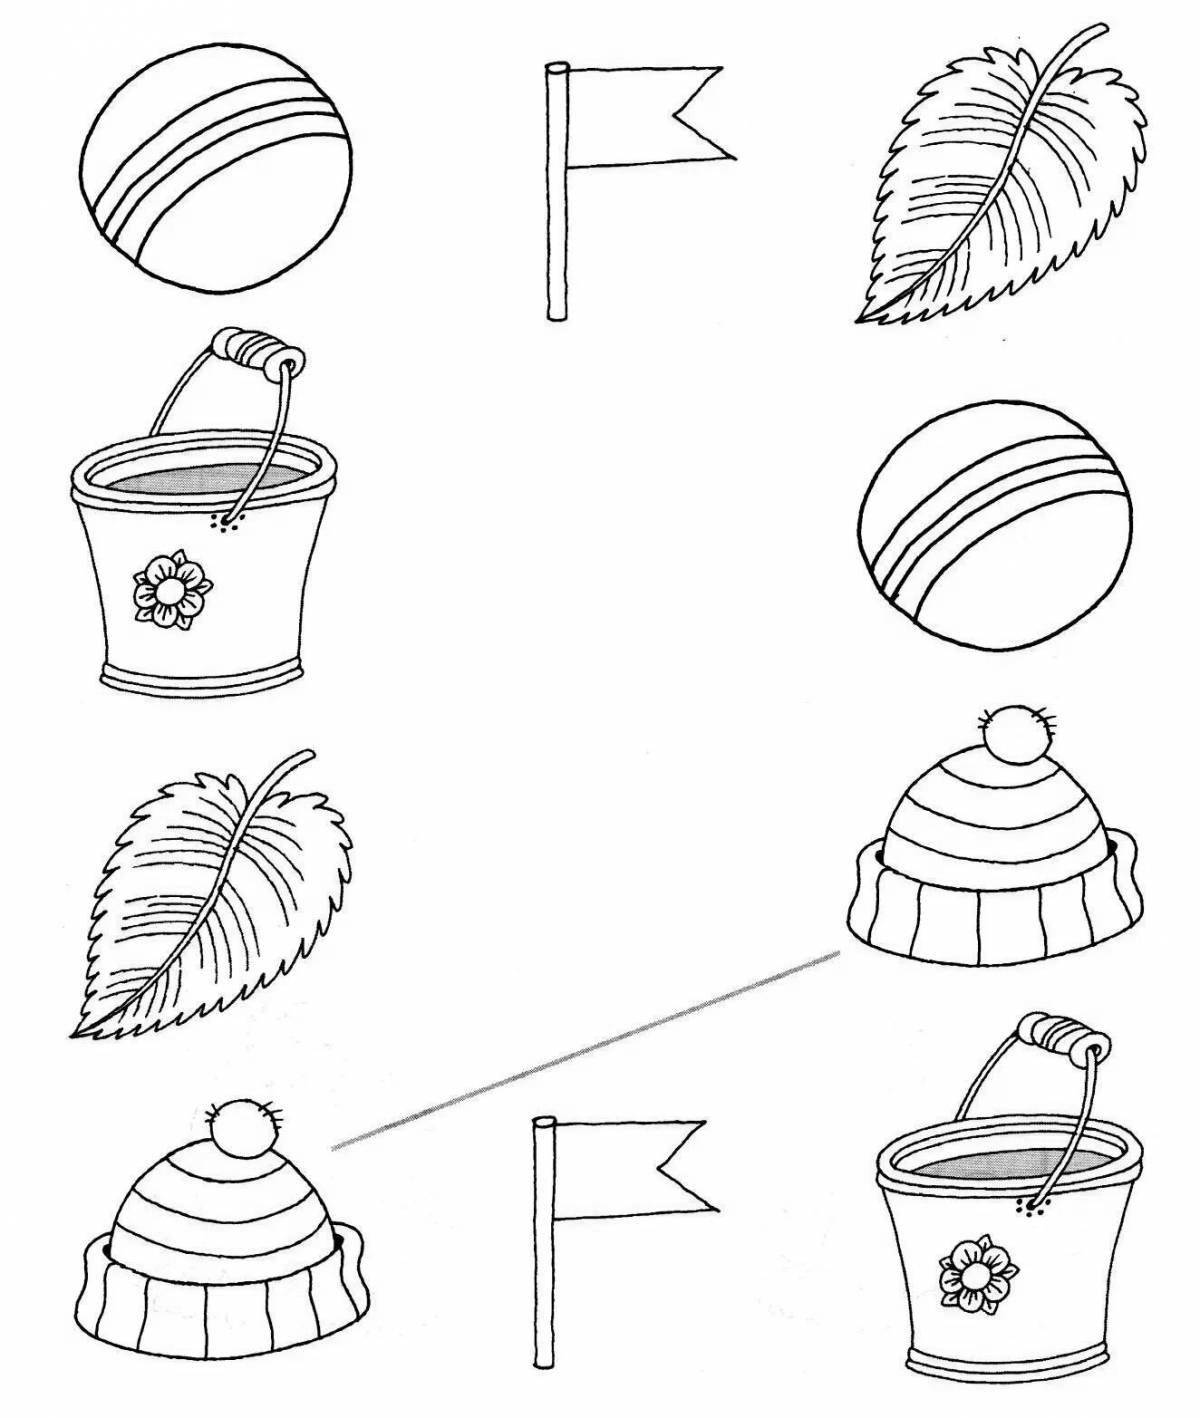 Colourful coloring pages for little scientists